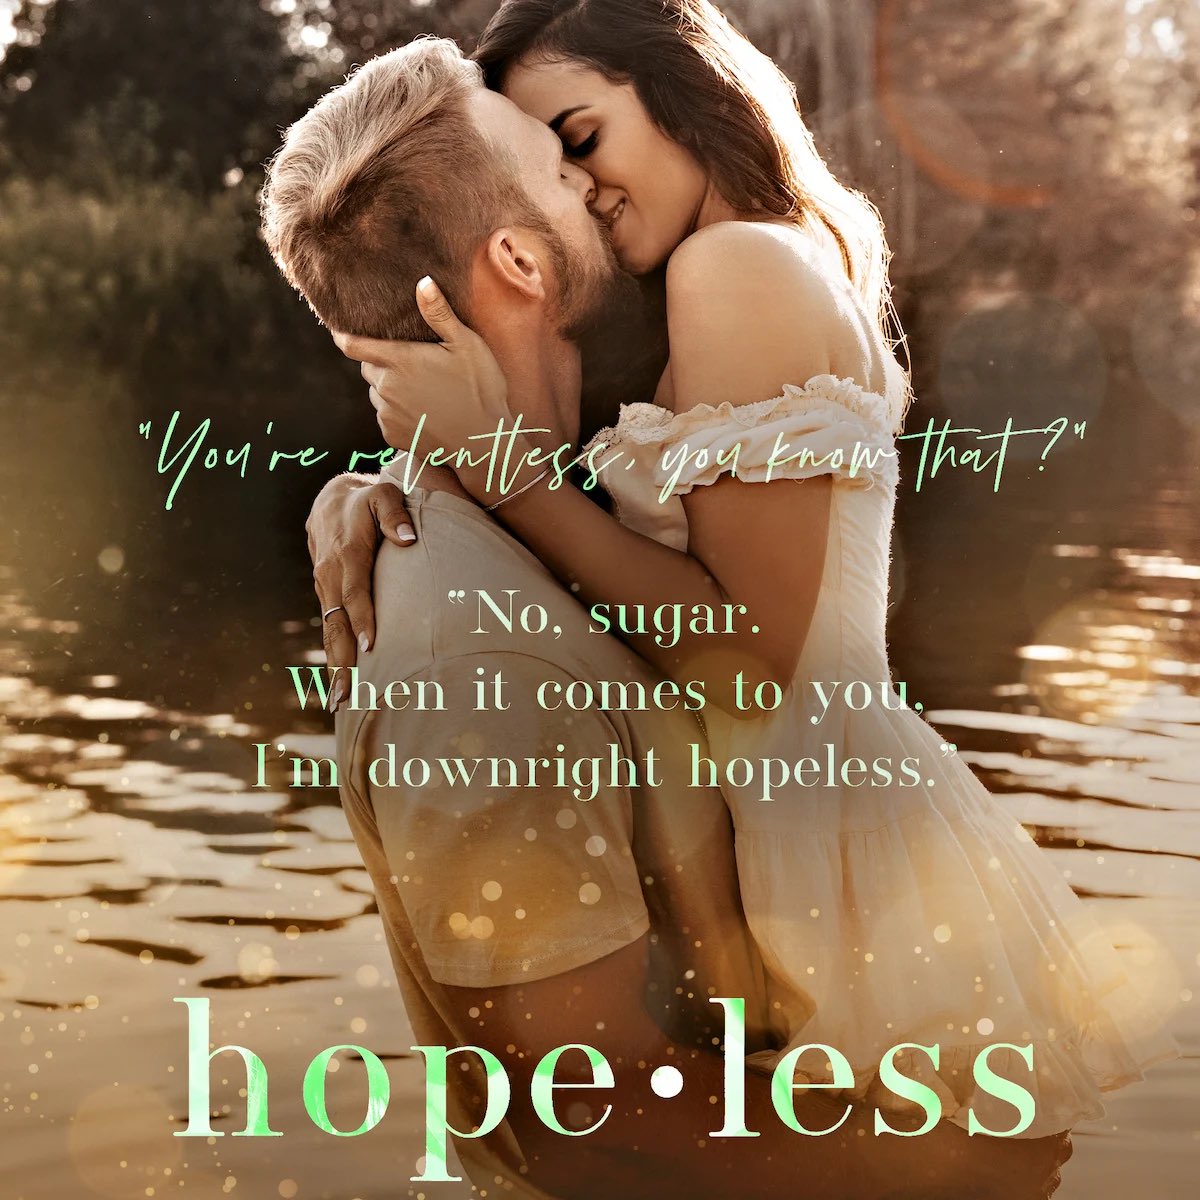 When 'he falls first', we fall harder. 

Hopeless by @AuthorElsie releases in ONE WEEK. October 13th

Preorder here >> geni.us/gethopeless

#AgeGap #HeFellFirst #ForcedProximity #SmallTownRomance #VirginHeroine #MilitaryRomance #SlowBurn #TorturedHero #FakeRelationship